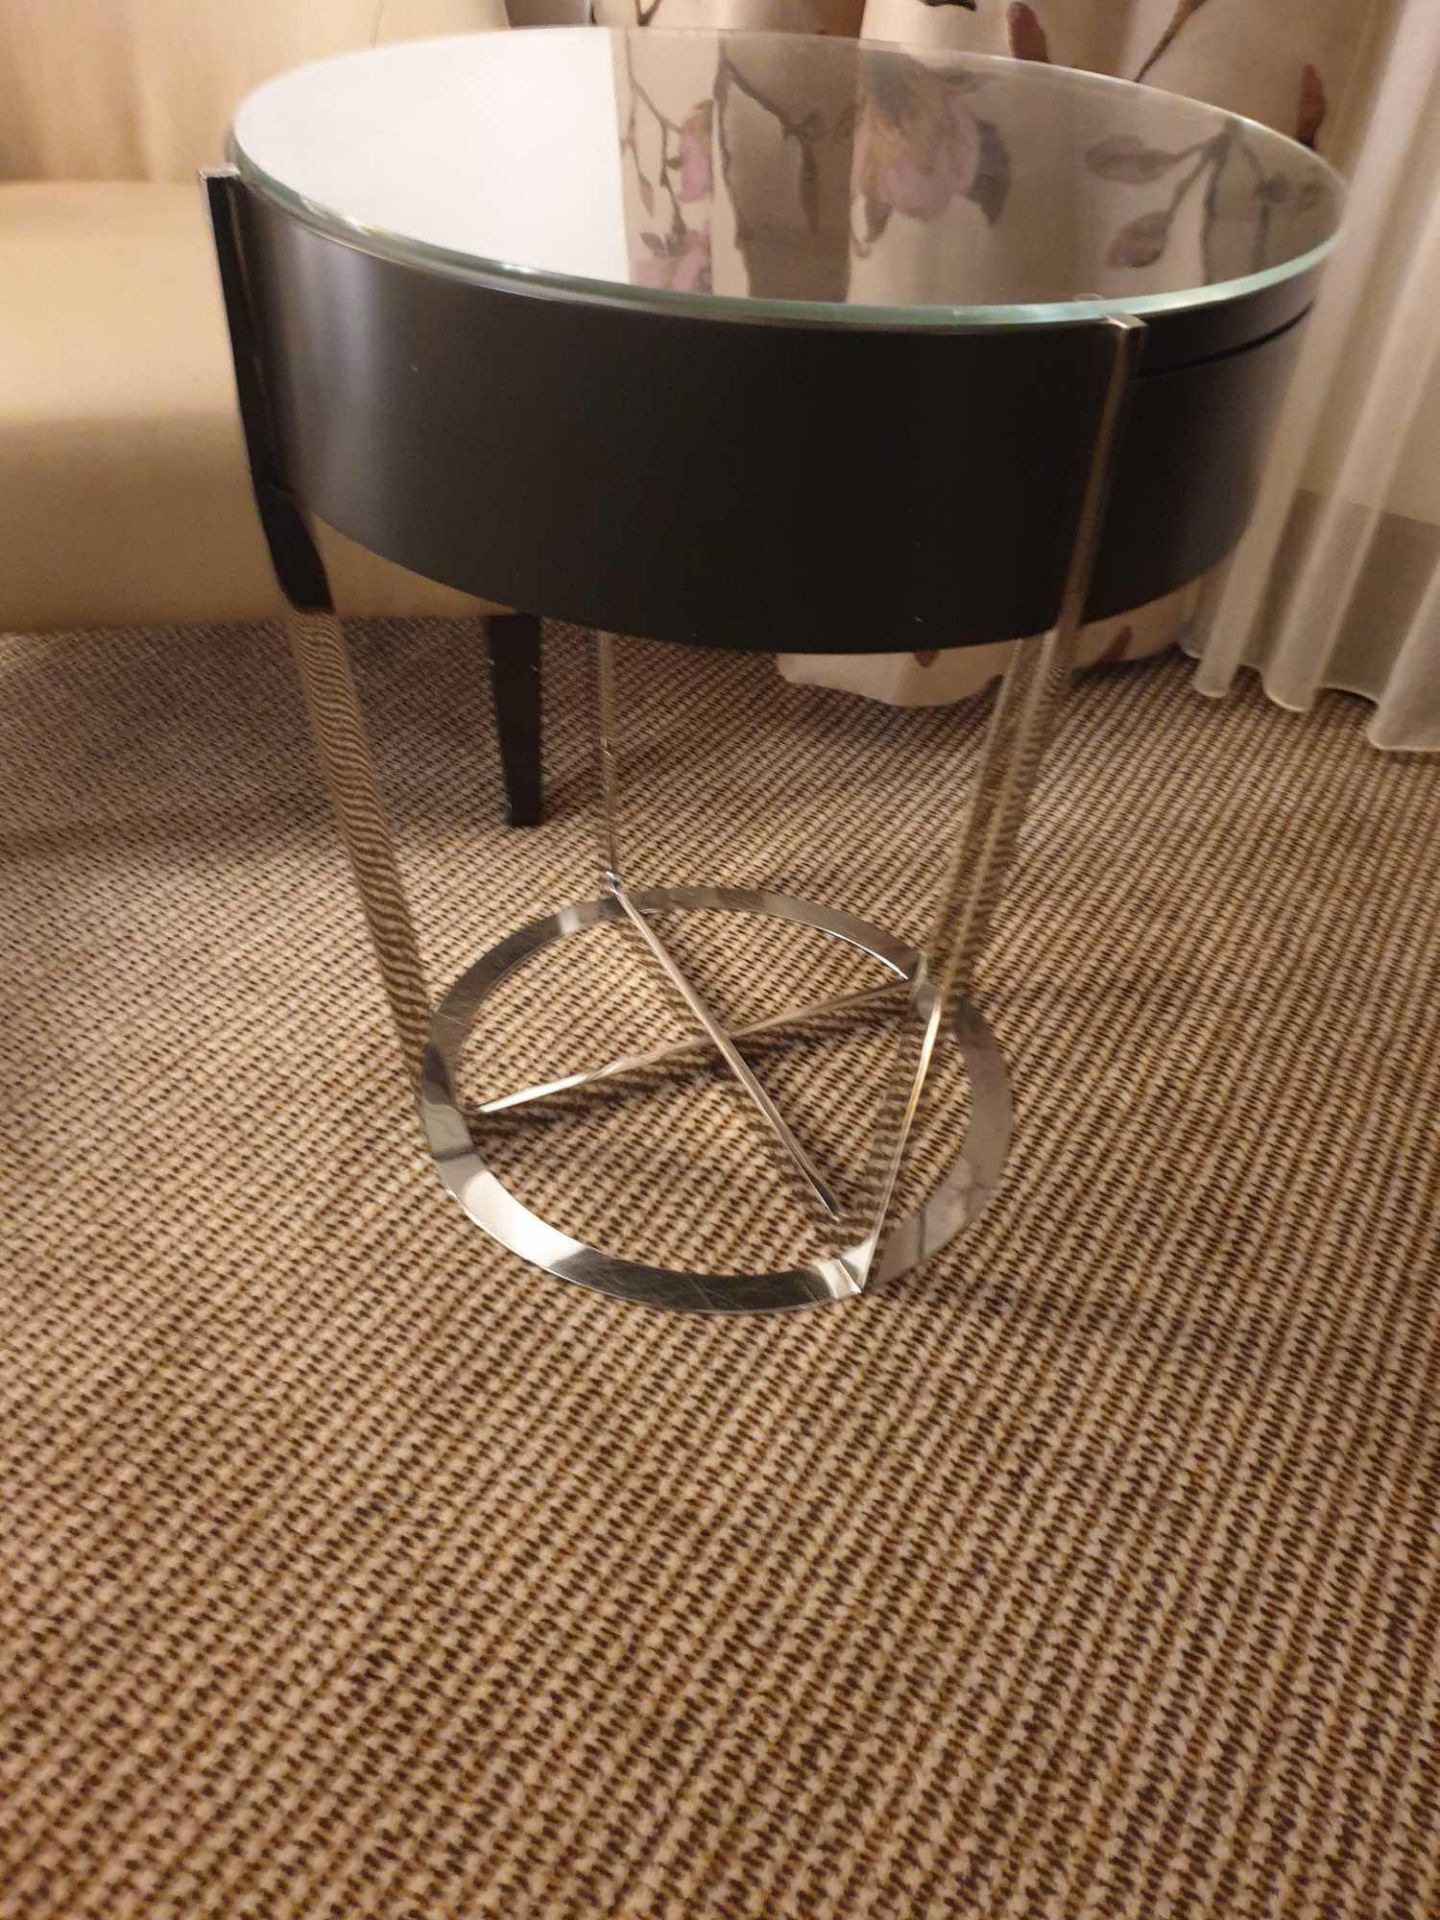 A Pair Of Contemporary Black Ash Side Table Glass Top With Single Drawer Stainless Steel Legs 50 X - Image 4 of 4